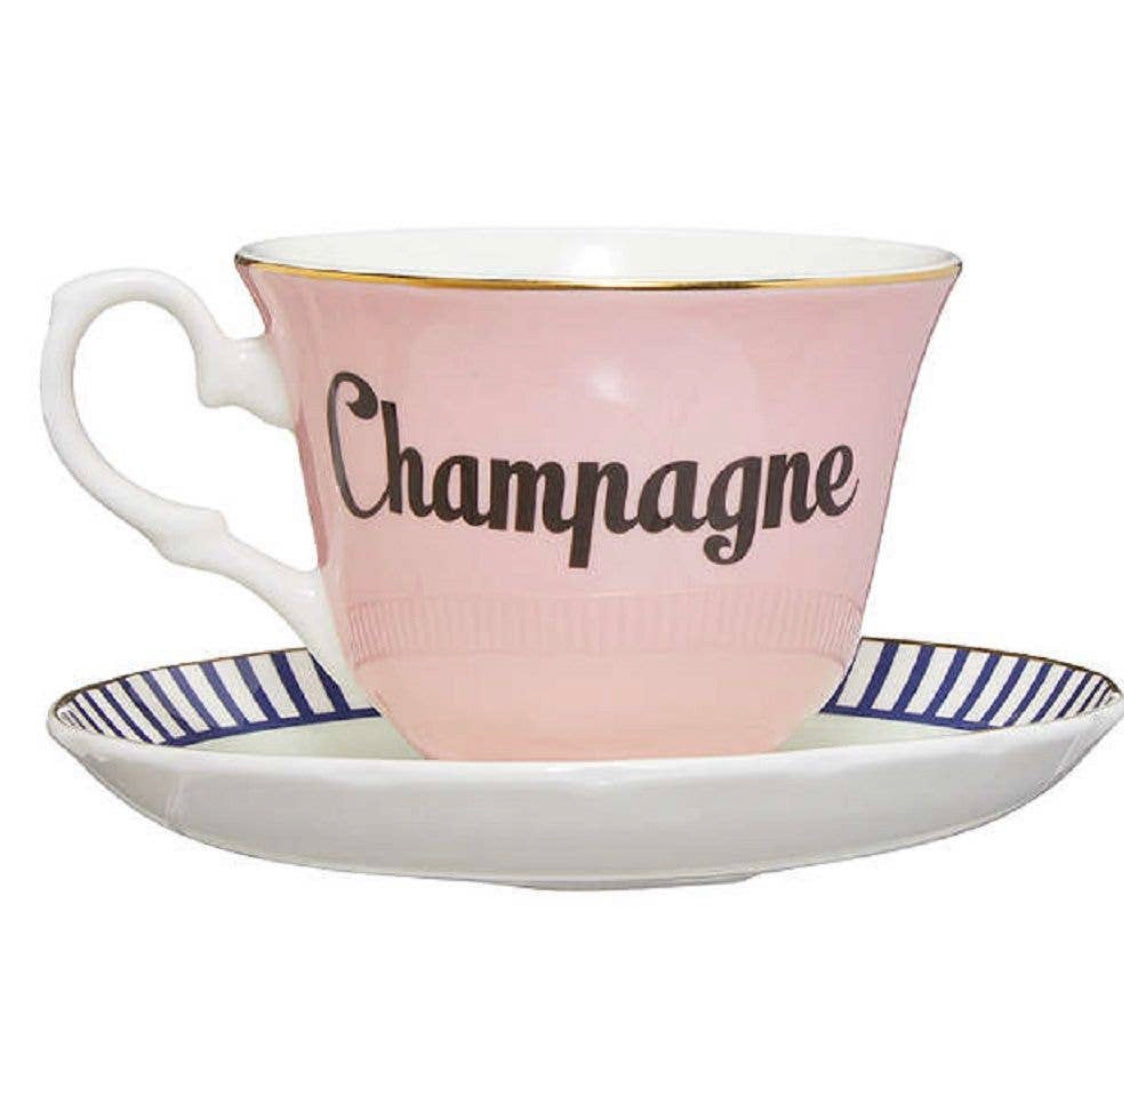 TEACUP AND SAUCER - CHAMPAGNE